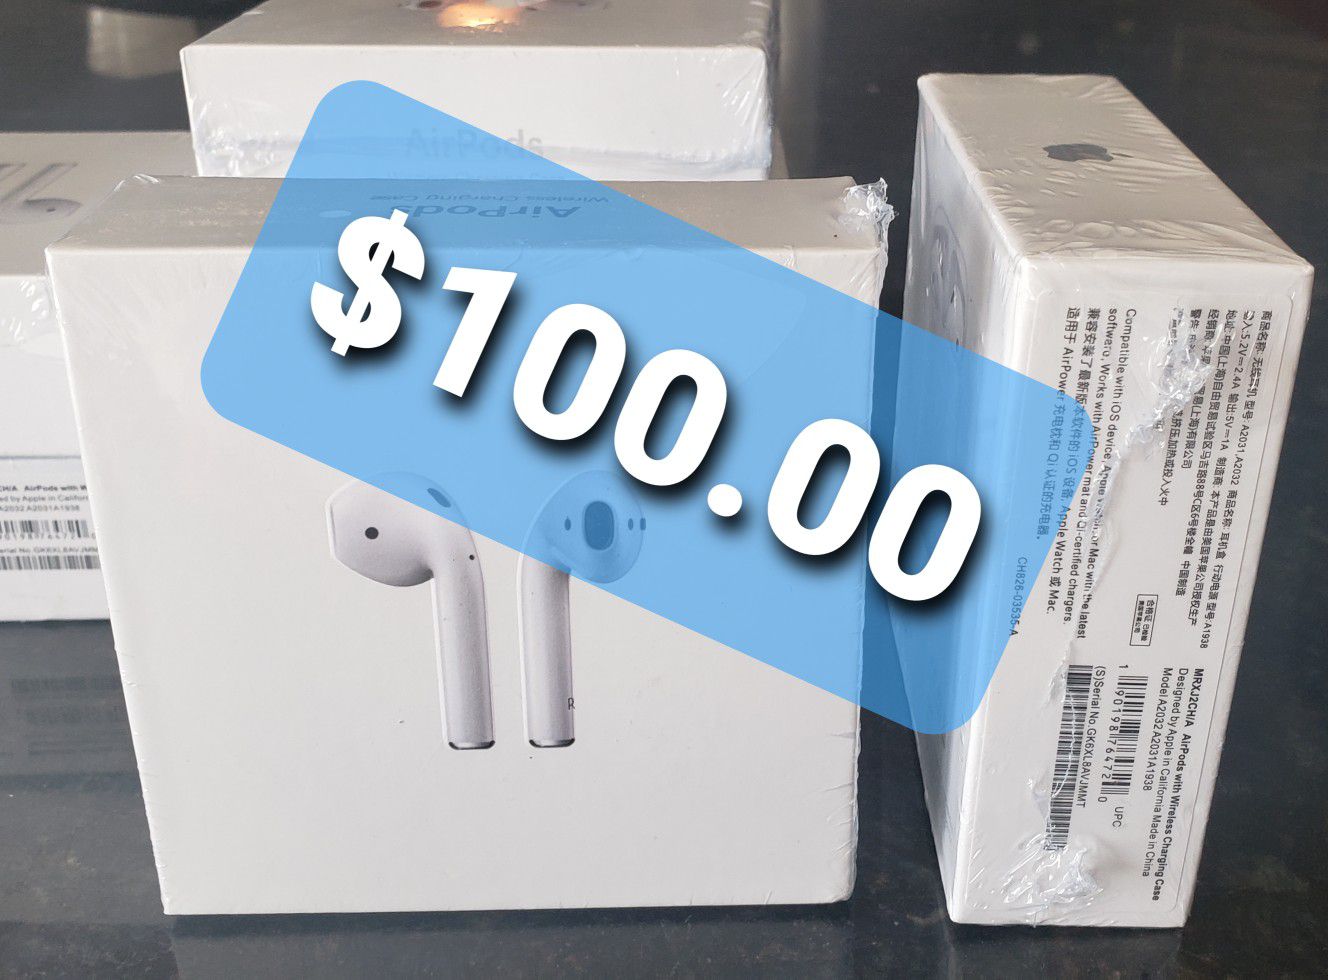 Airpods 2 earbuds with Wireless charging case